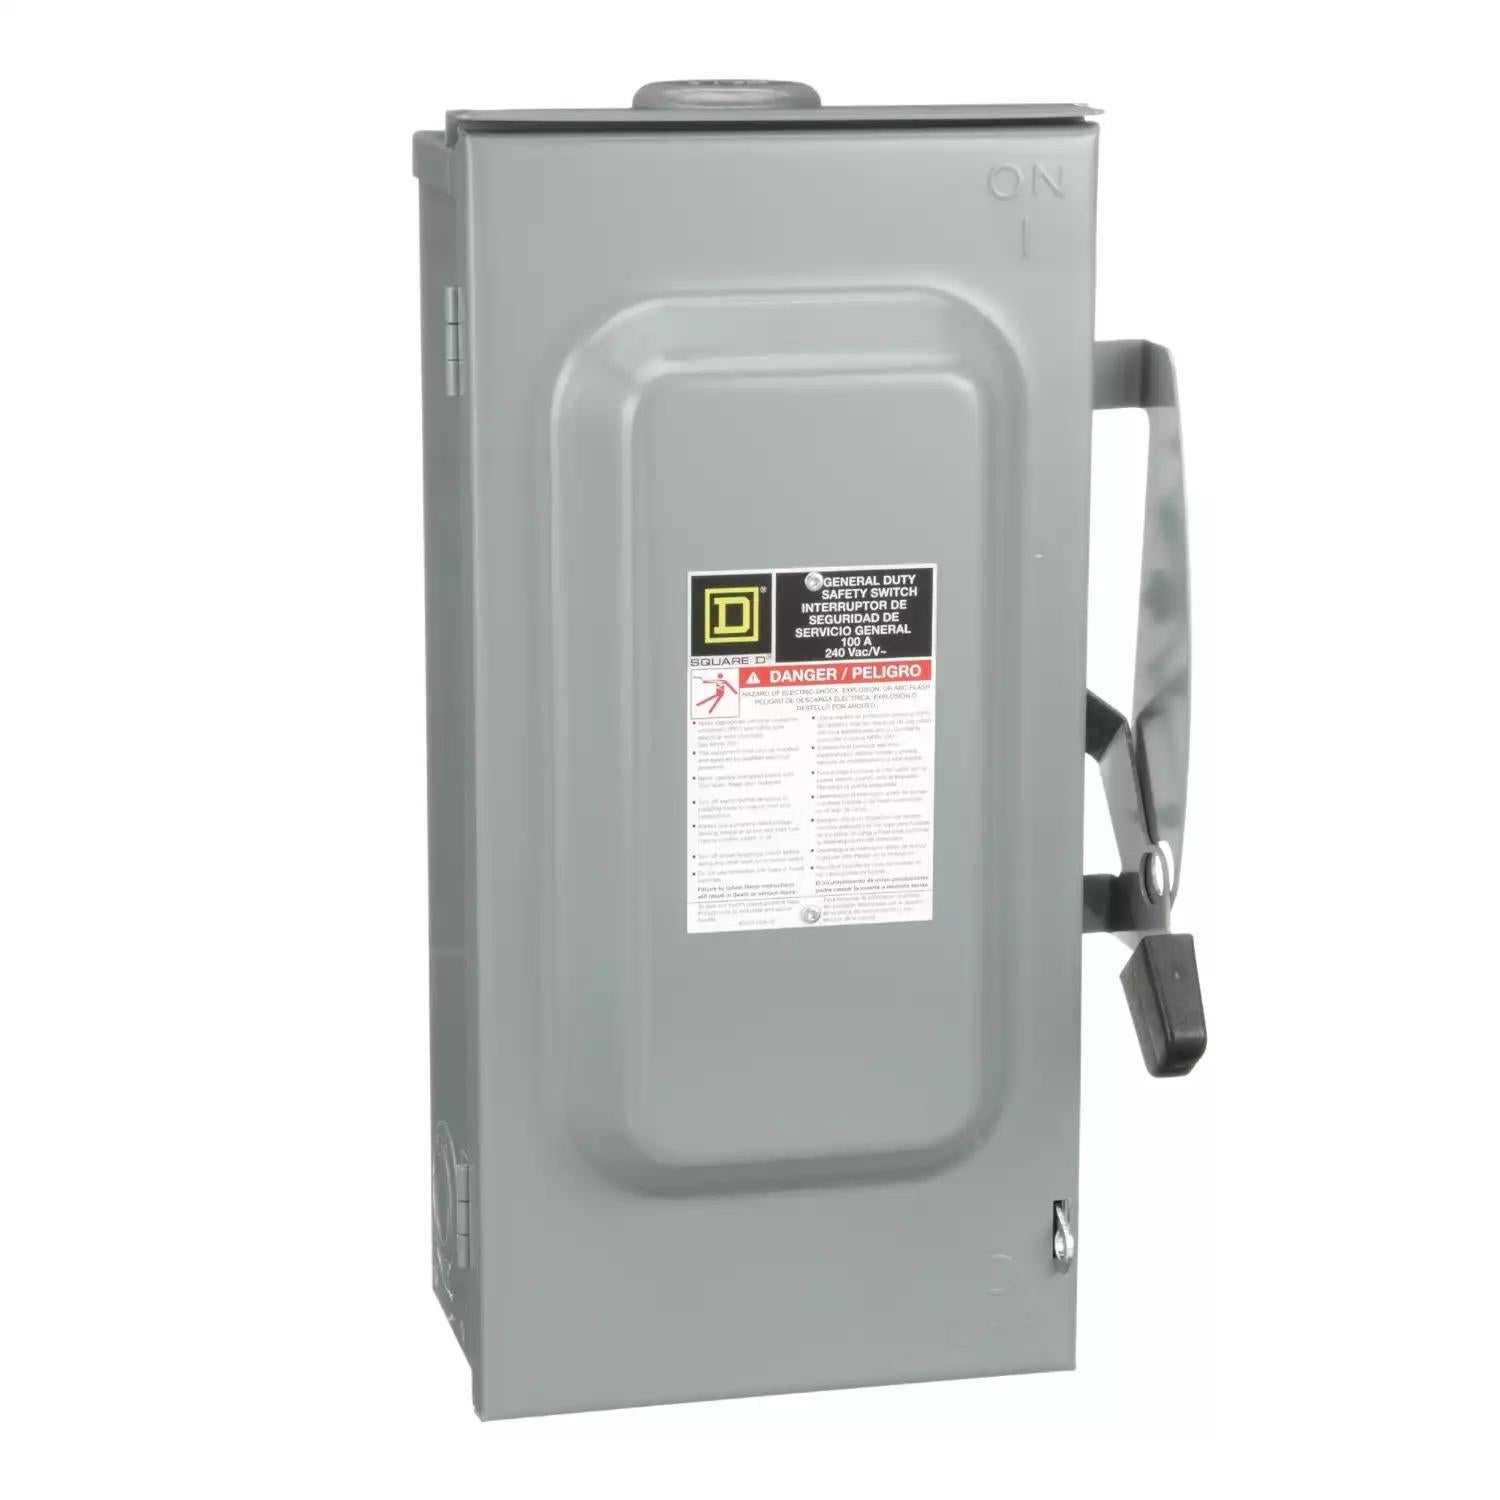 Safety switch, general duty, non fusible, 100A, 3 wire, 3 poles, 30hp, 240VAC, Type 3R, bolt on hub provision